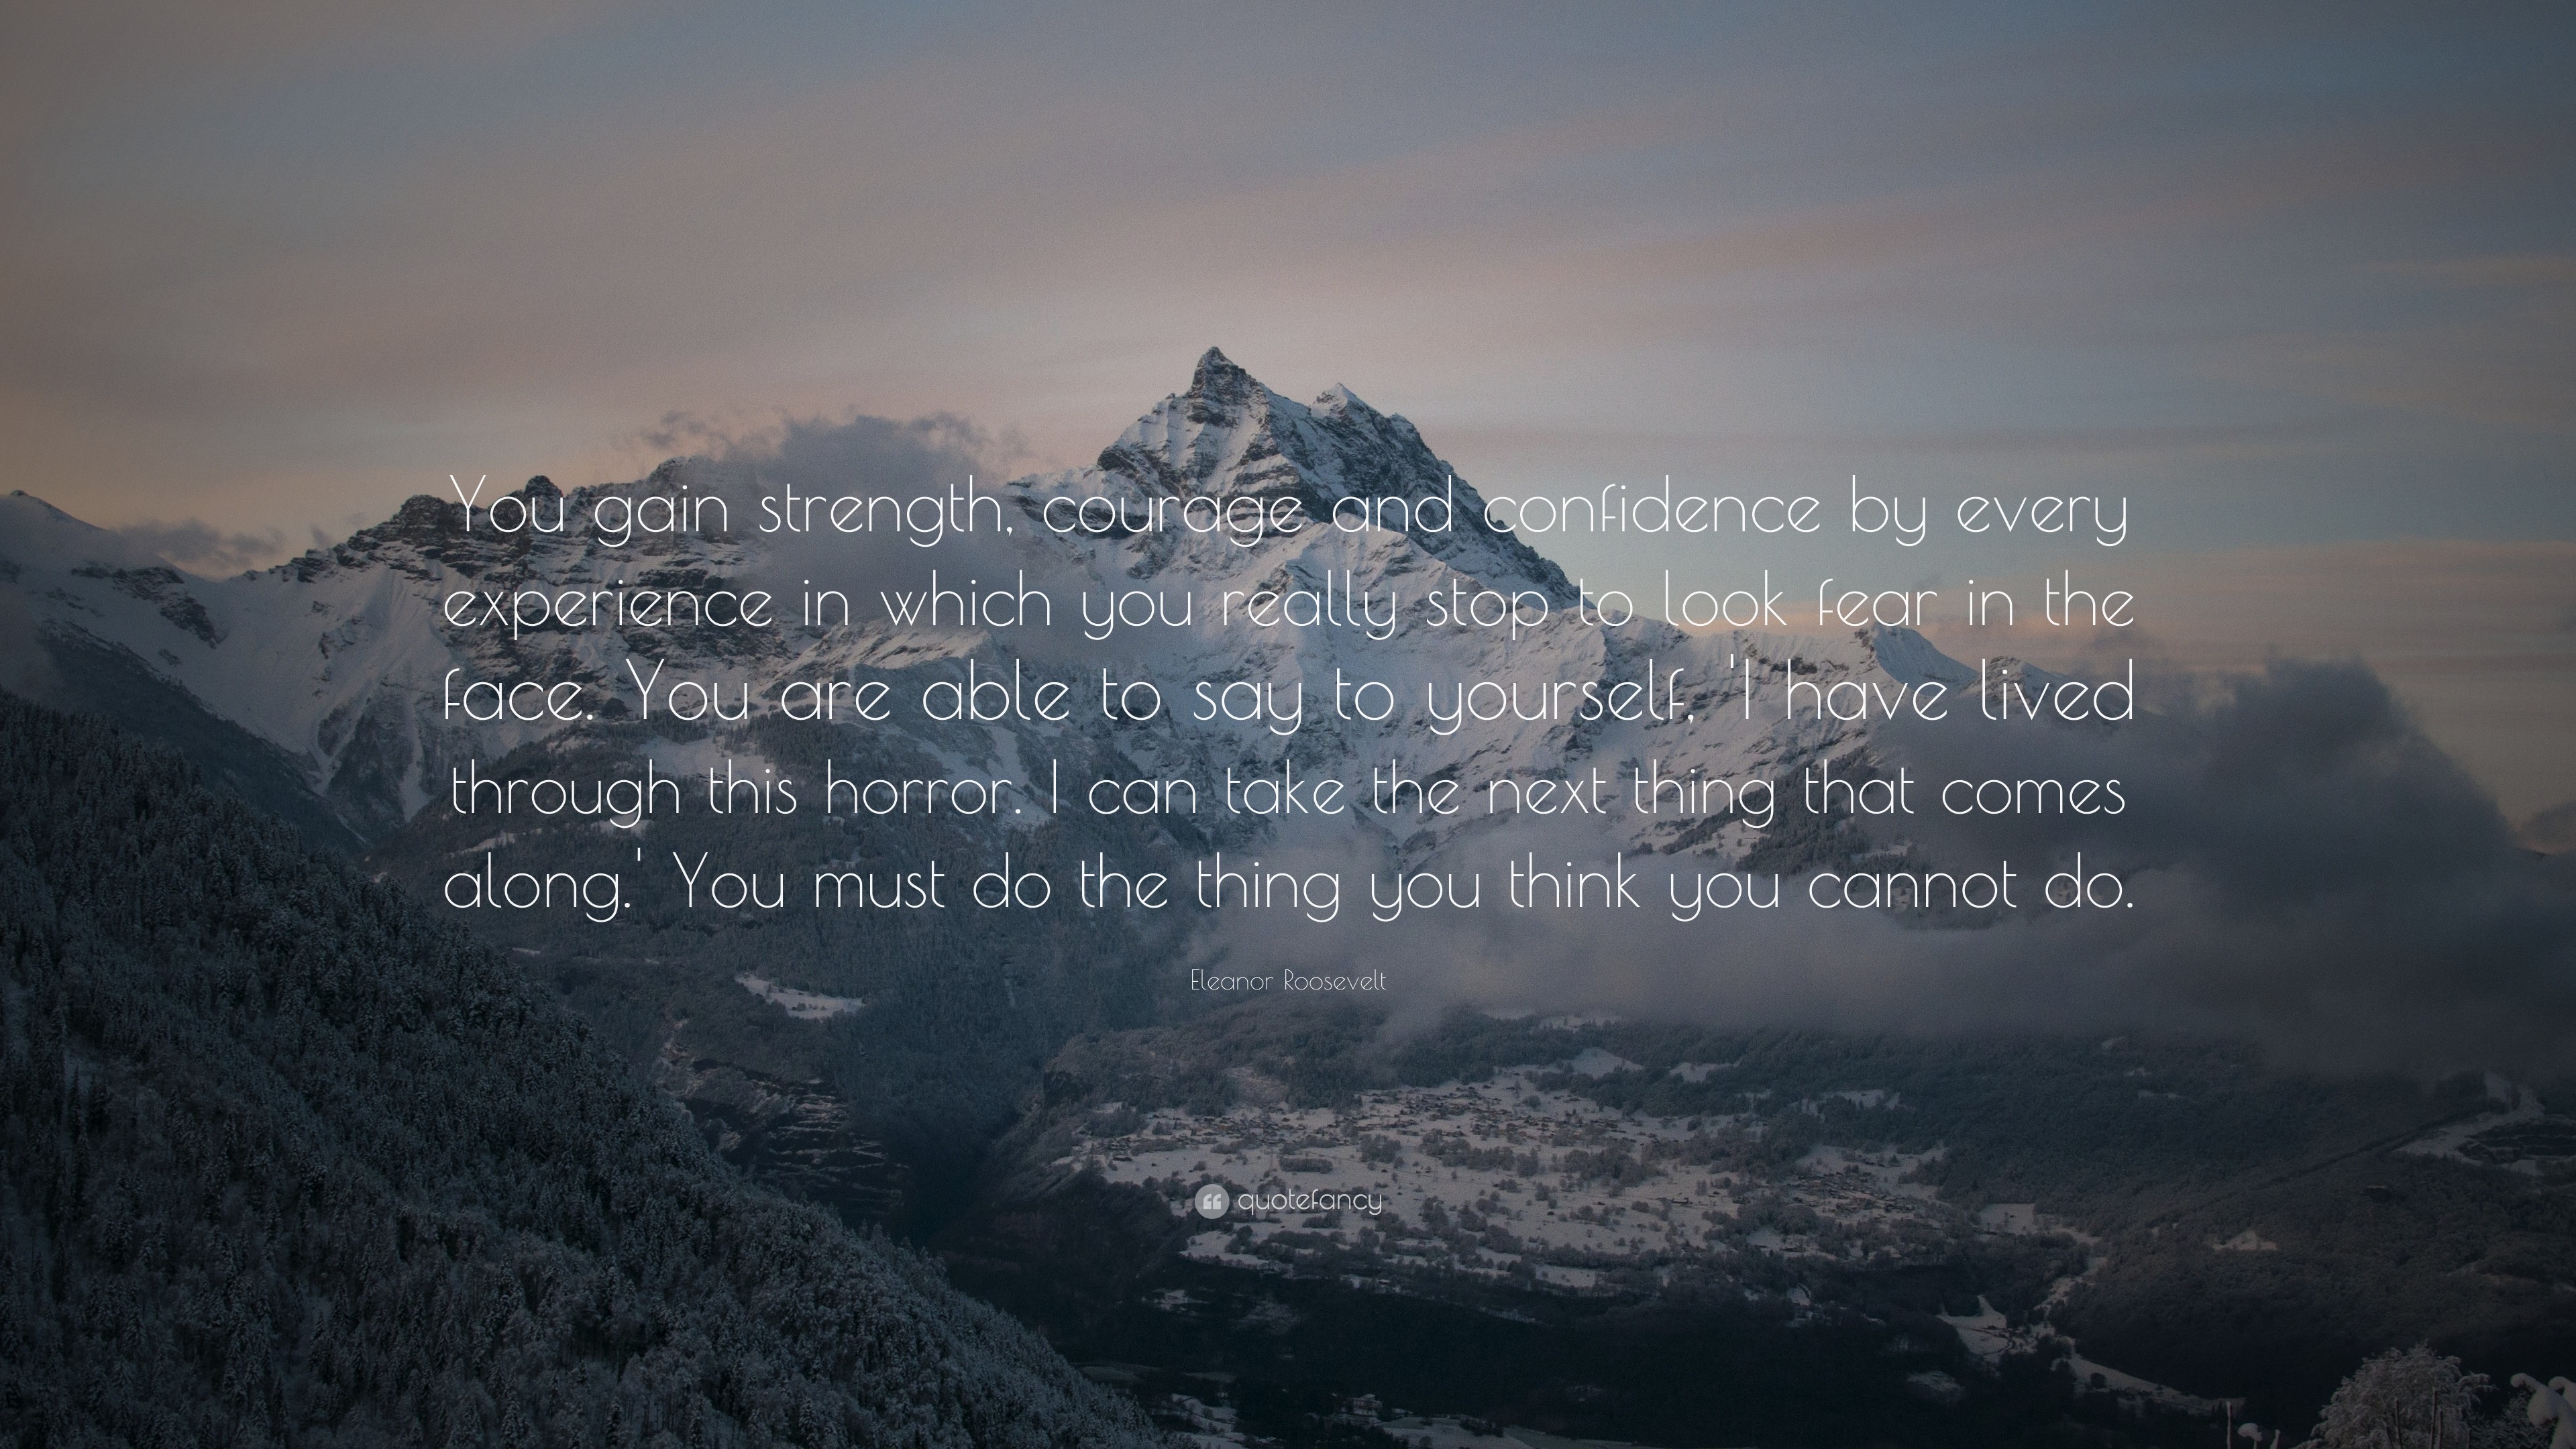 3840x2160 Confidence Quotes: “You gain strength, courage and confidence by every  experience in which